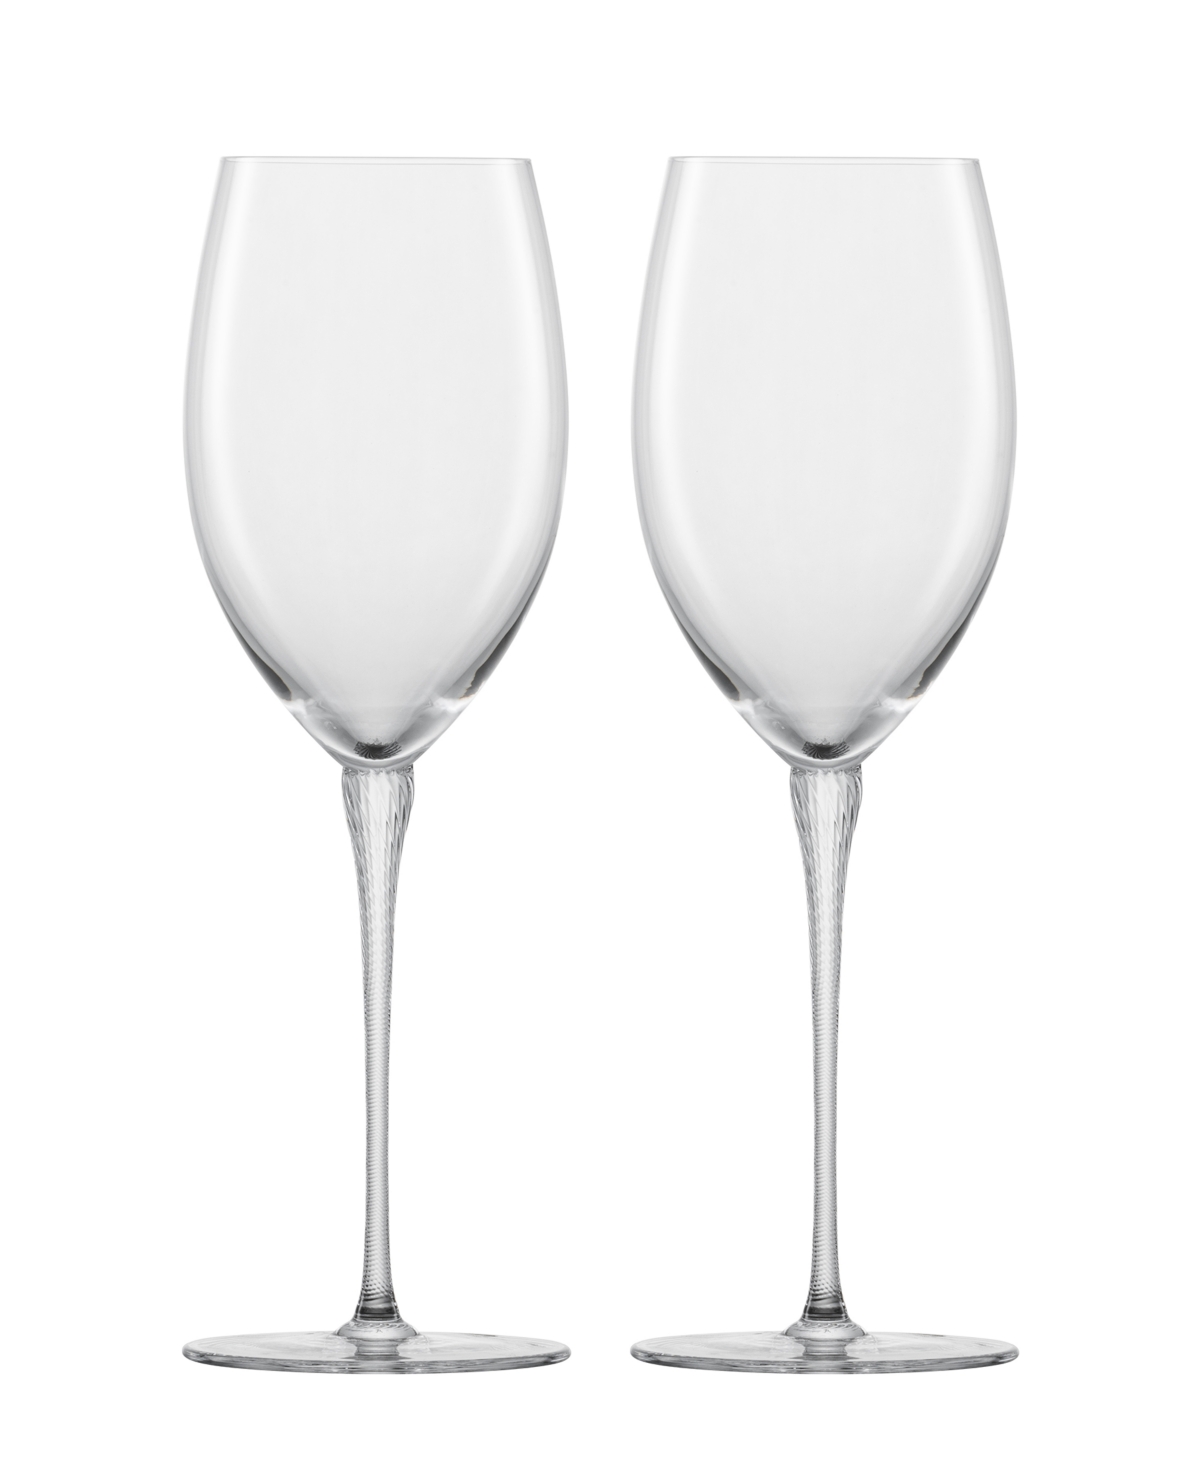 Zwiesel Glas Handmade Highness Sauvignon Blanc 10.8 Oz, Set Of 2 In Clear